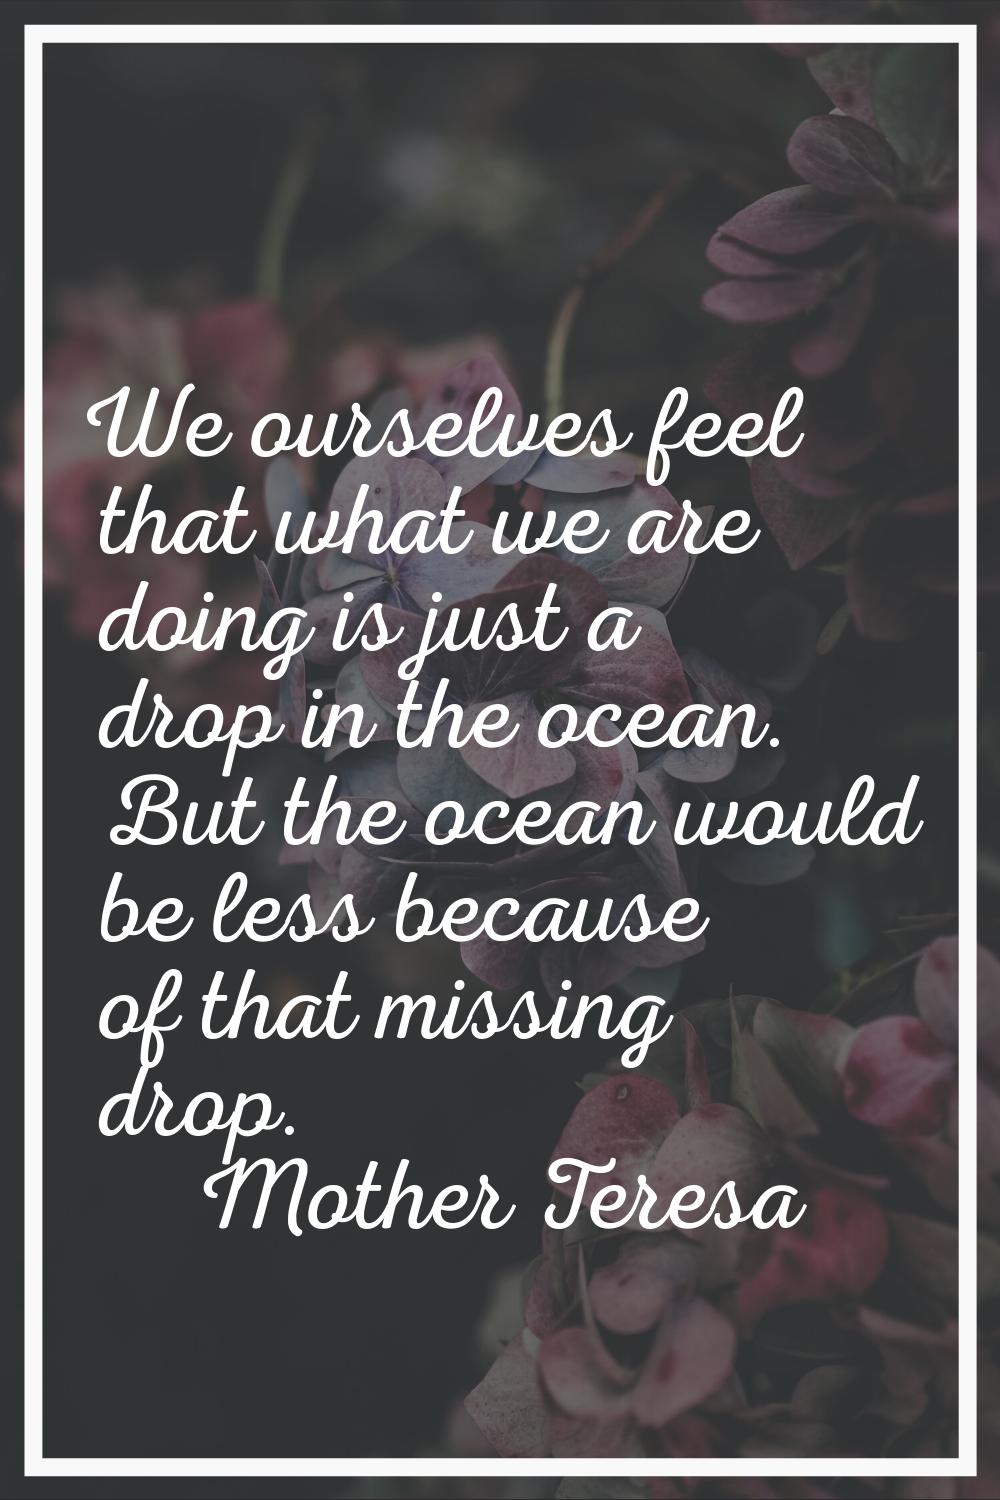 We ourselves feel that what we are doing is just a drop in the ocean. But the ocean would be less b